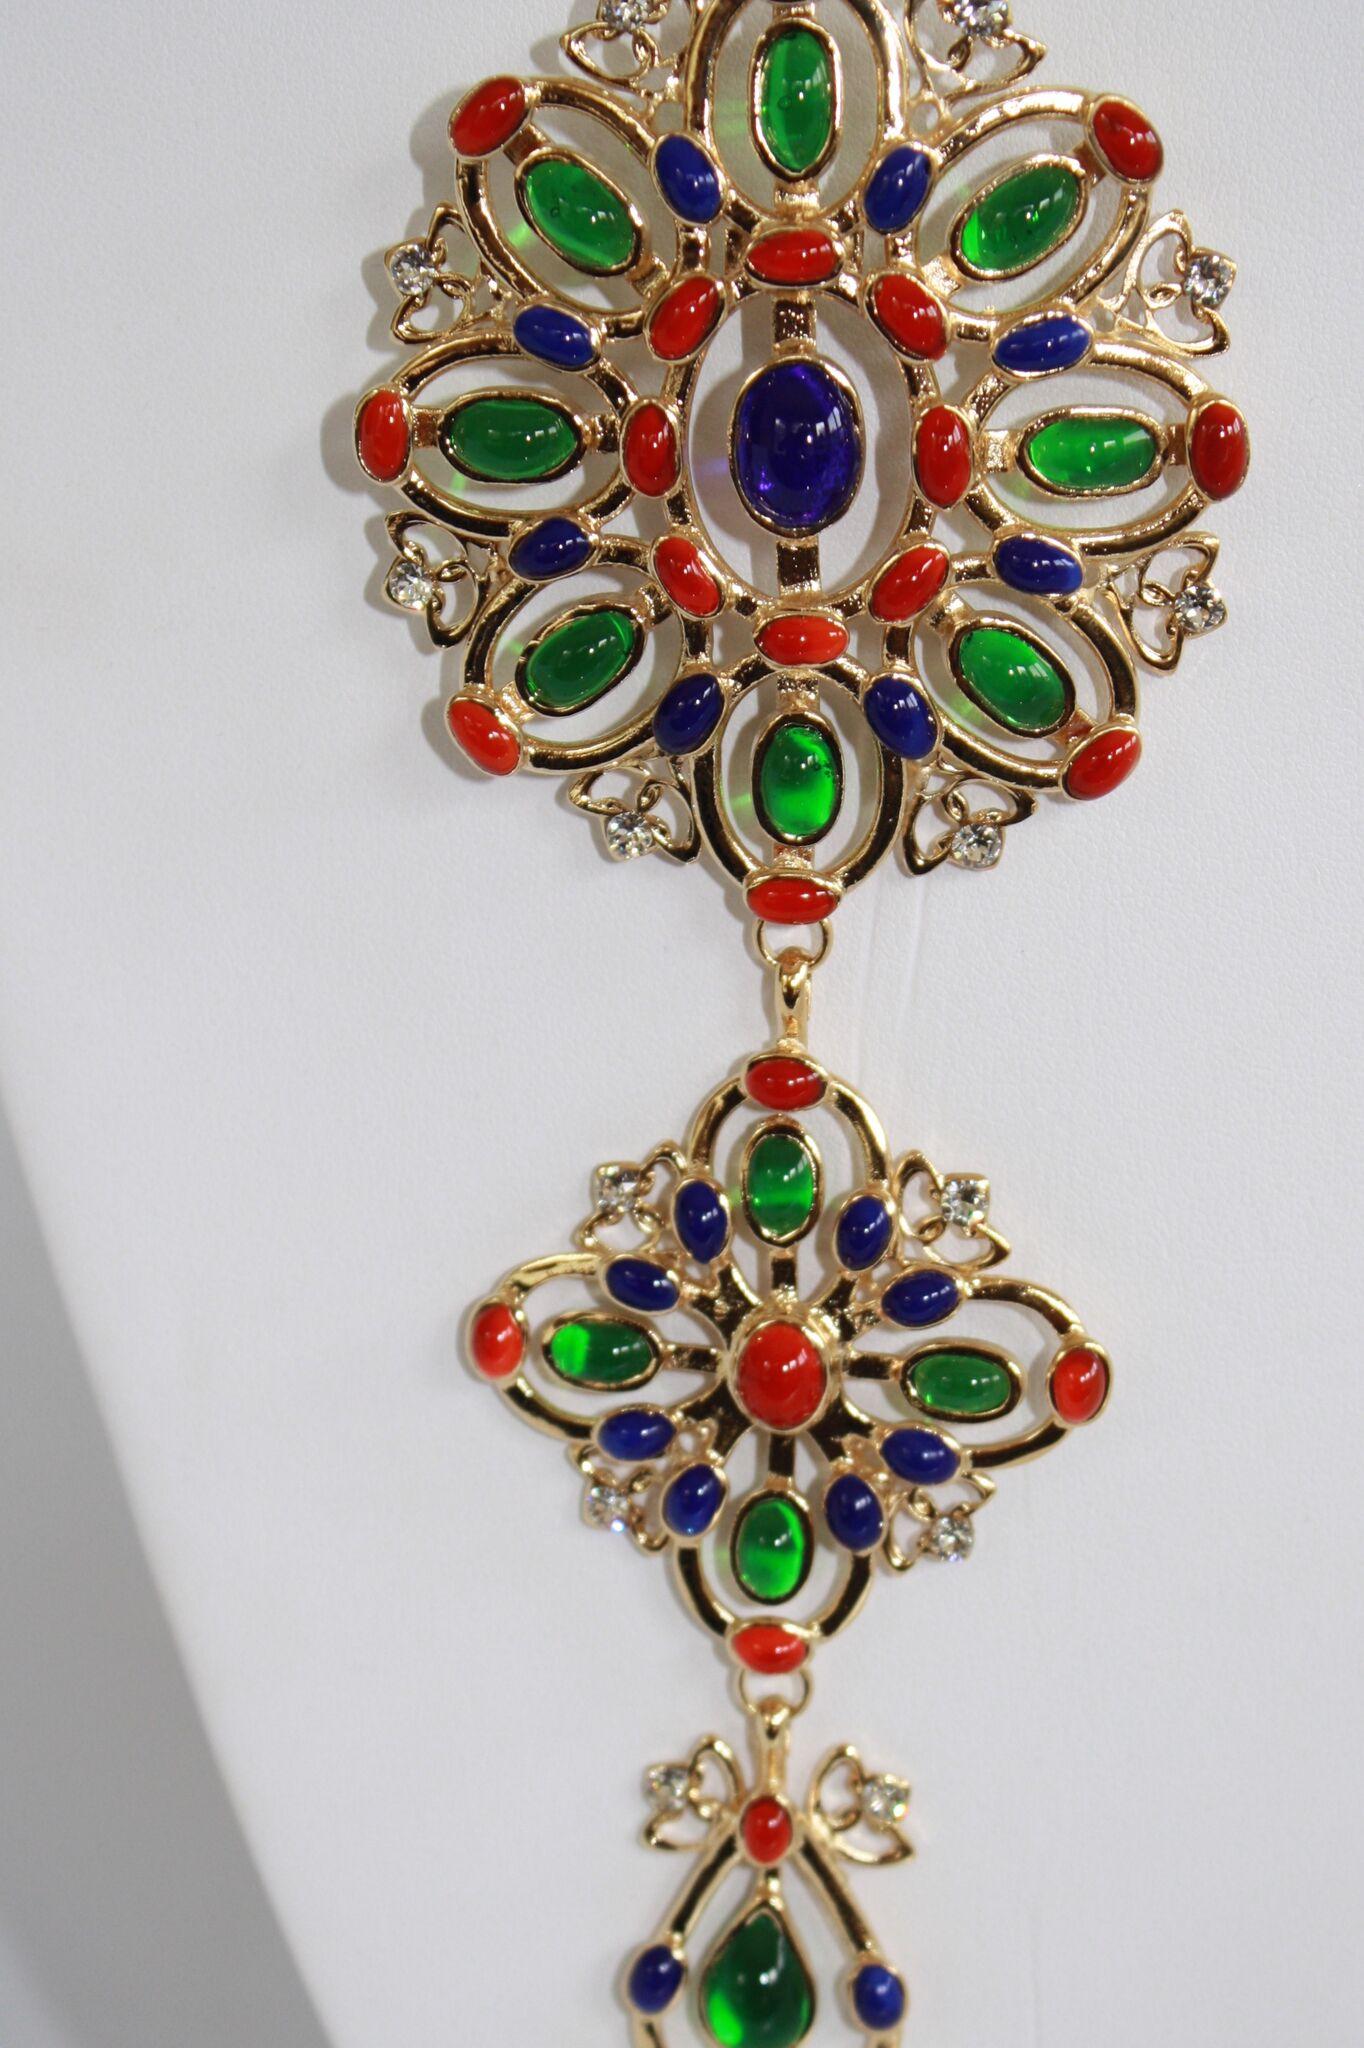 Red, blue, and green poured glass pendant necklace made with 24k gold plated chain. 

Chain is 75cm and pendant is 14.5cm